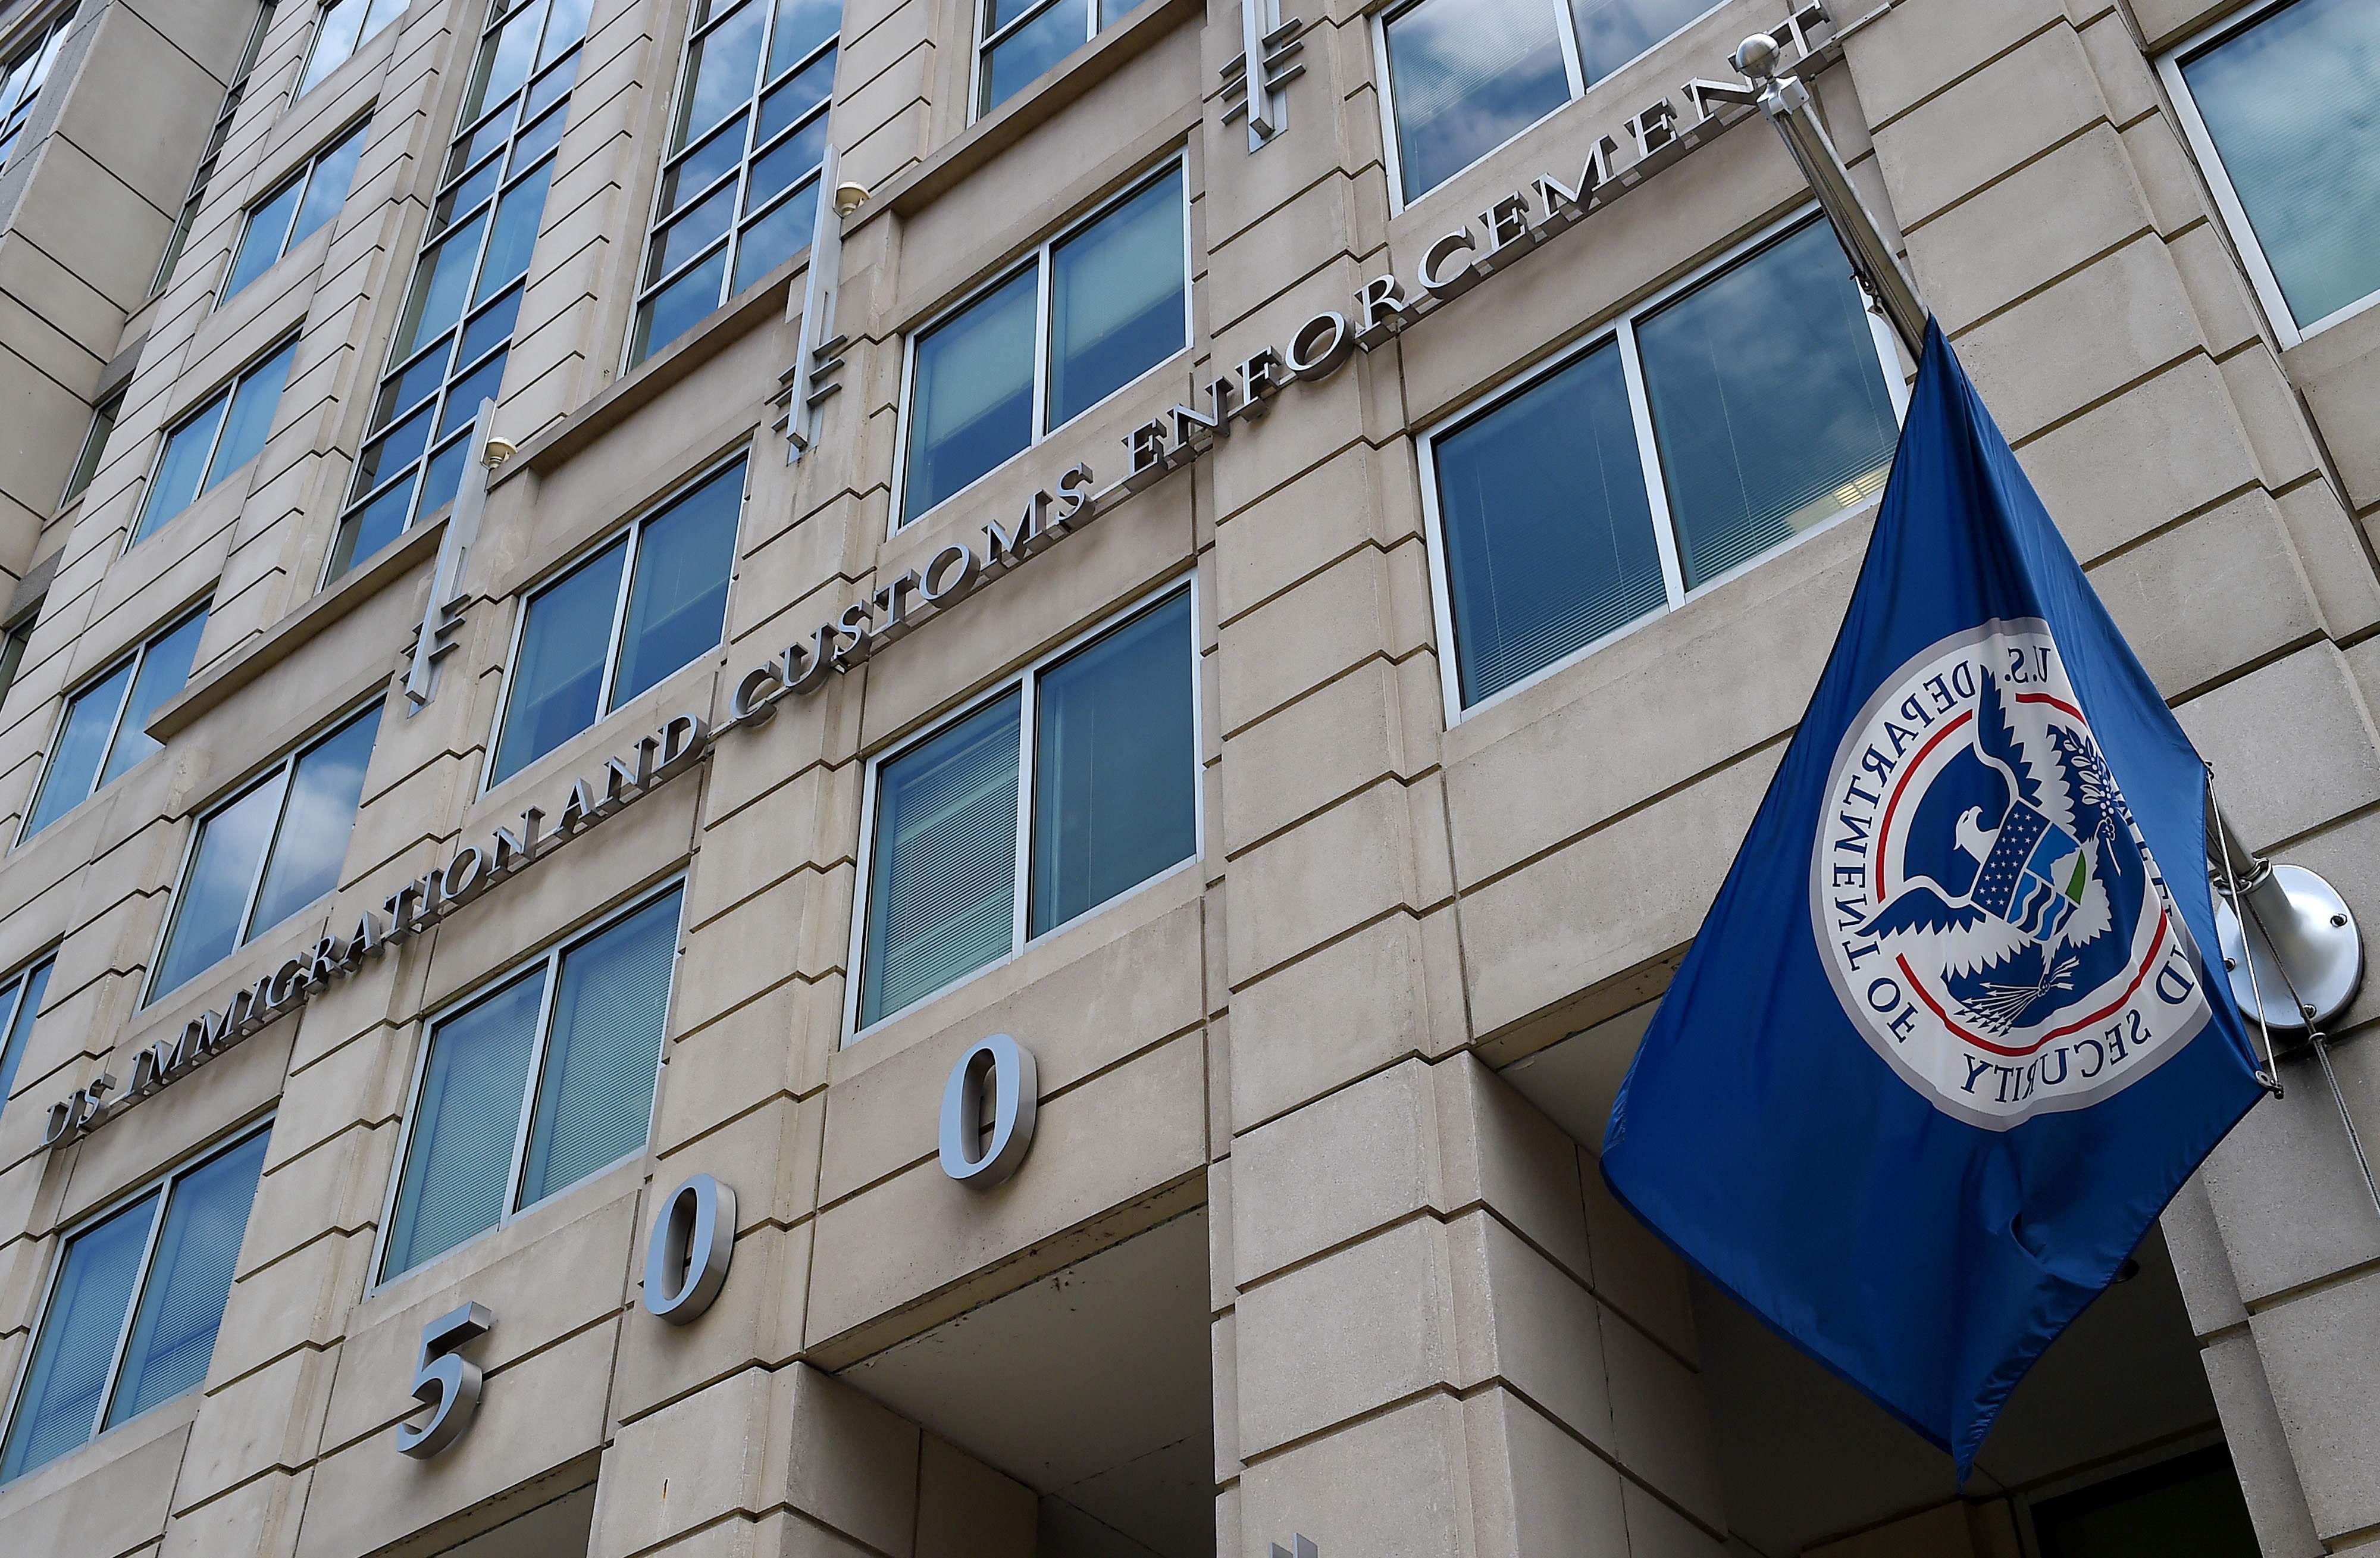 The Department of Homeland Security flag flies outside the Immigration and Customs Enforcement headquarters in Washington. (Olivier Douliery/AFP/Getty Images)